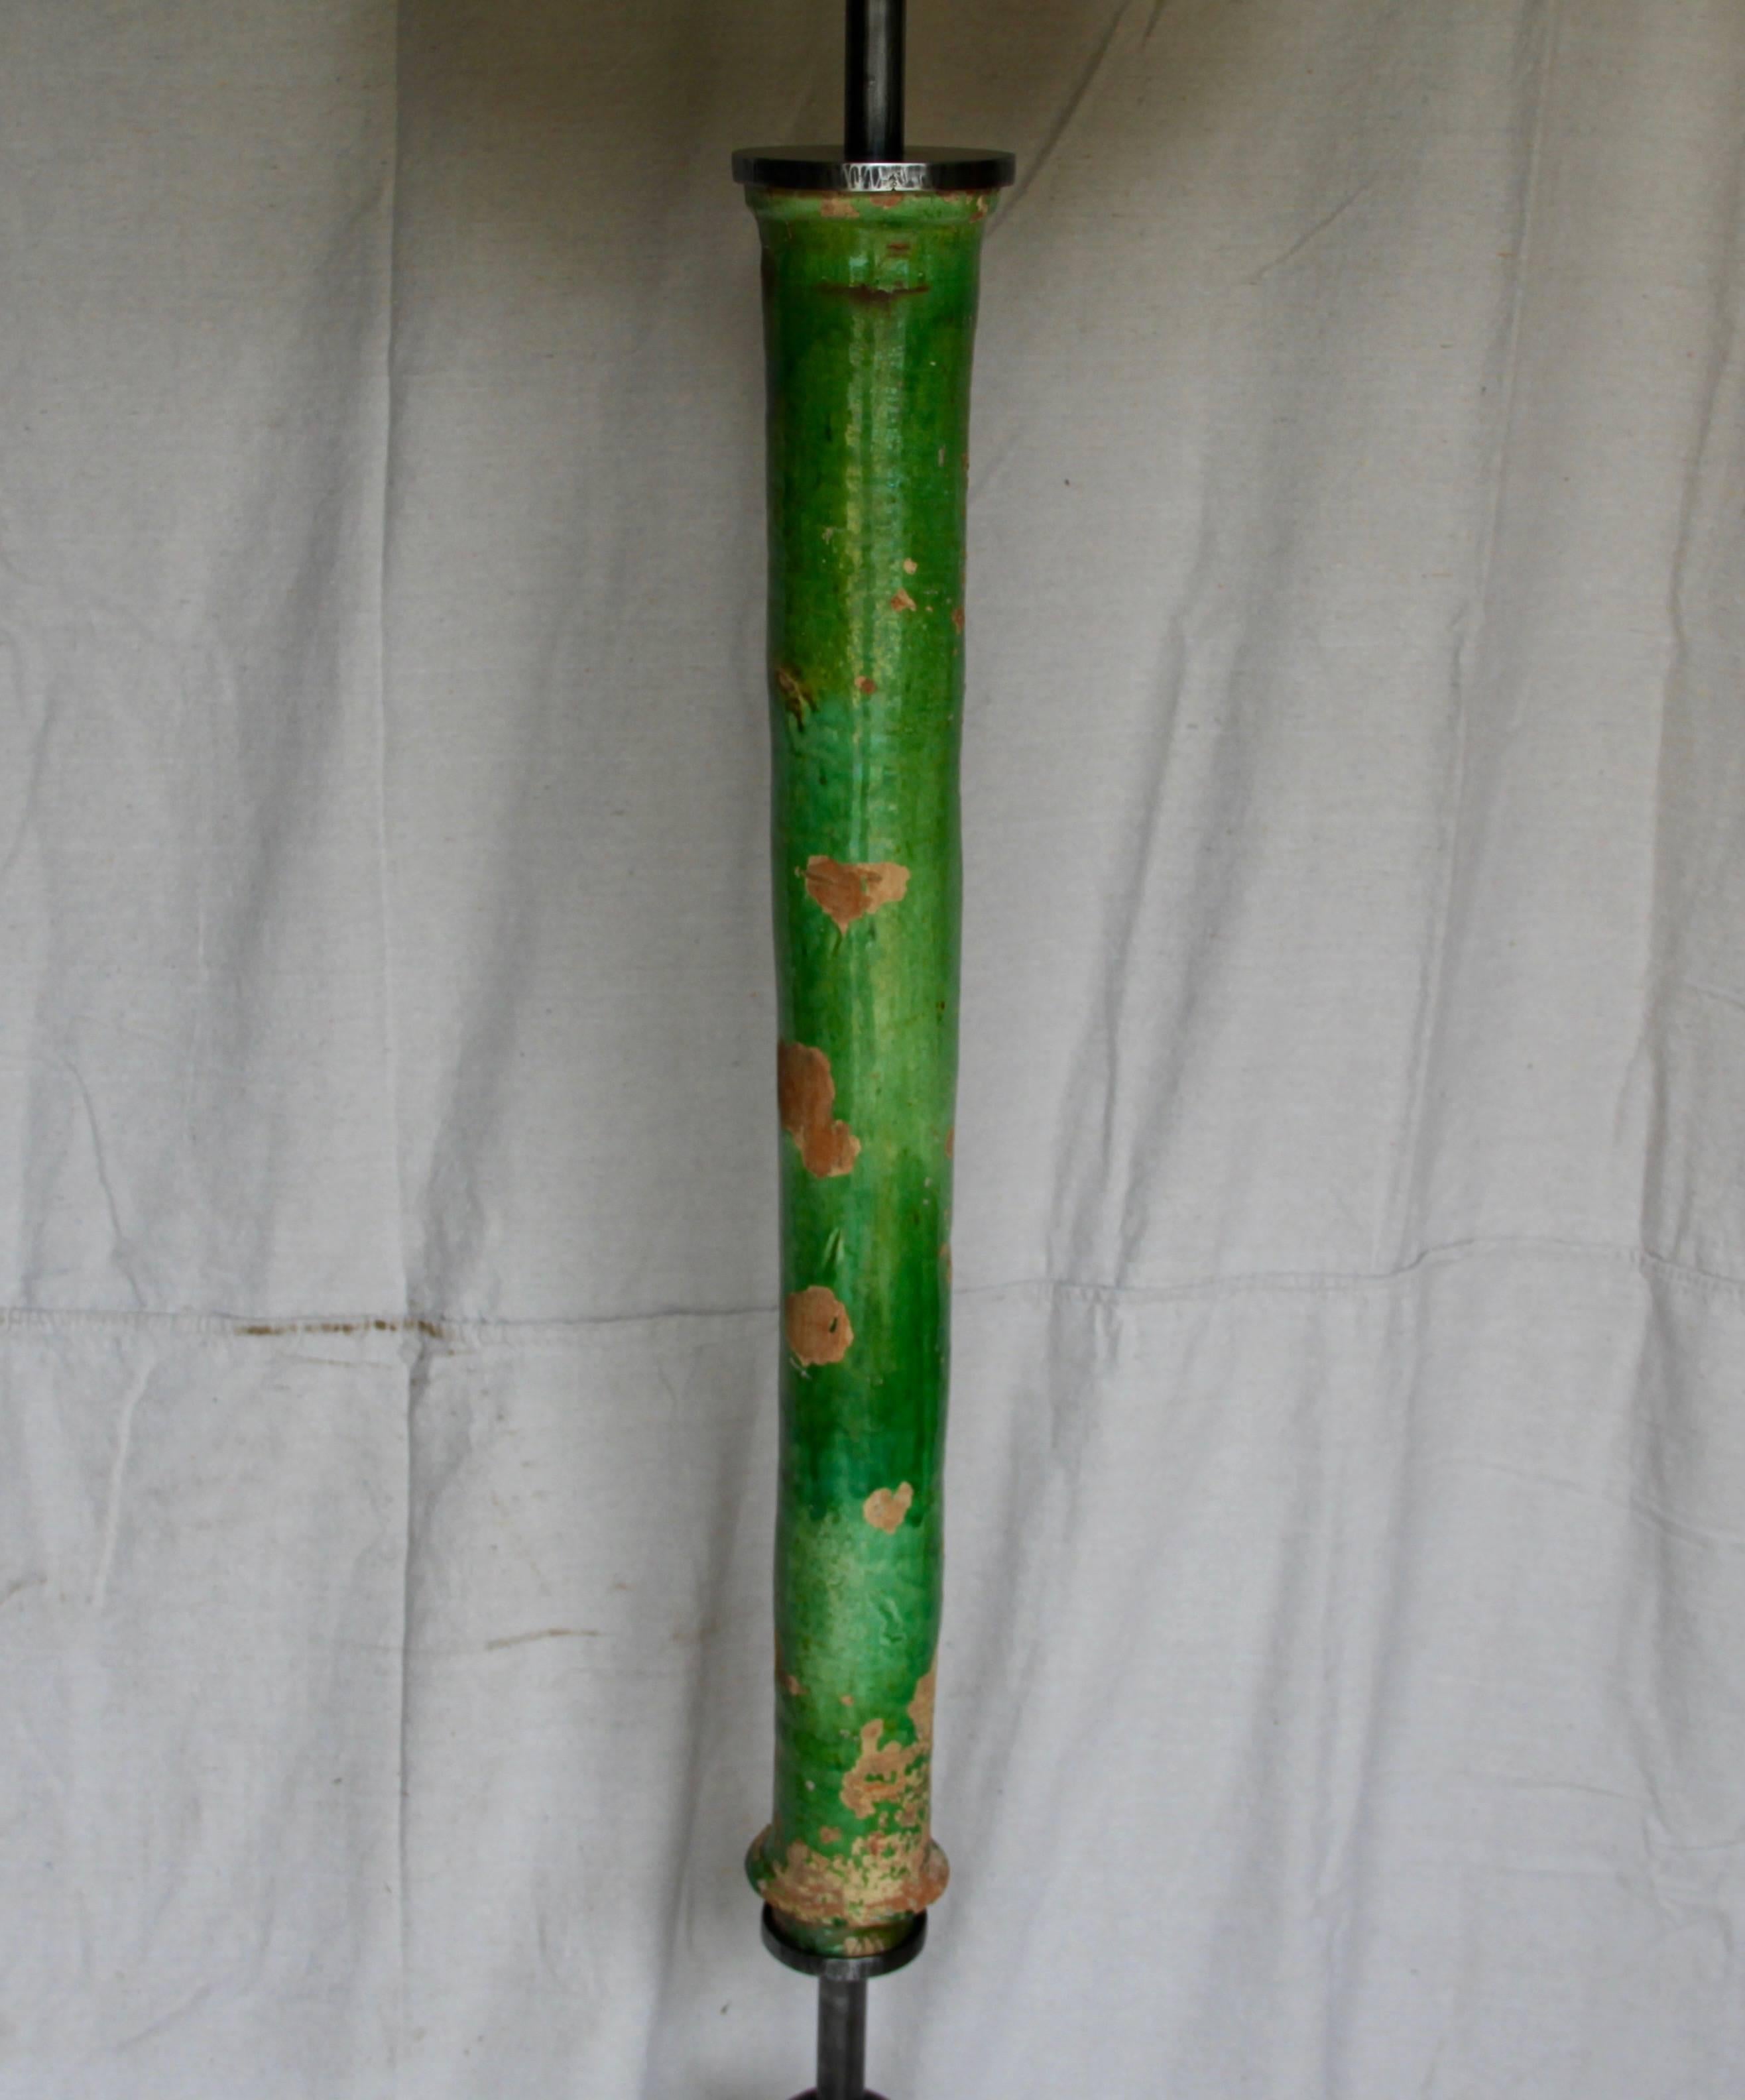 Take a century-old downspout from France, put it on a modern metal base, top it with a shade, and Voila! - You’ve got a one-of-a-kind floor lamp! The terracotta downspout has a thick, worn green glaze and the custom metal base still bears the marks